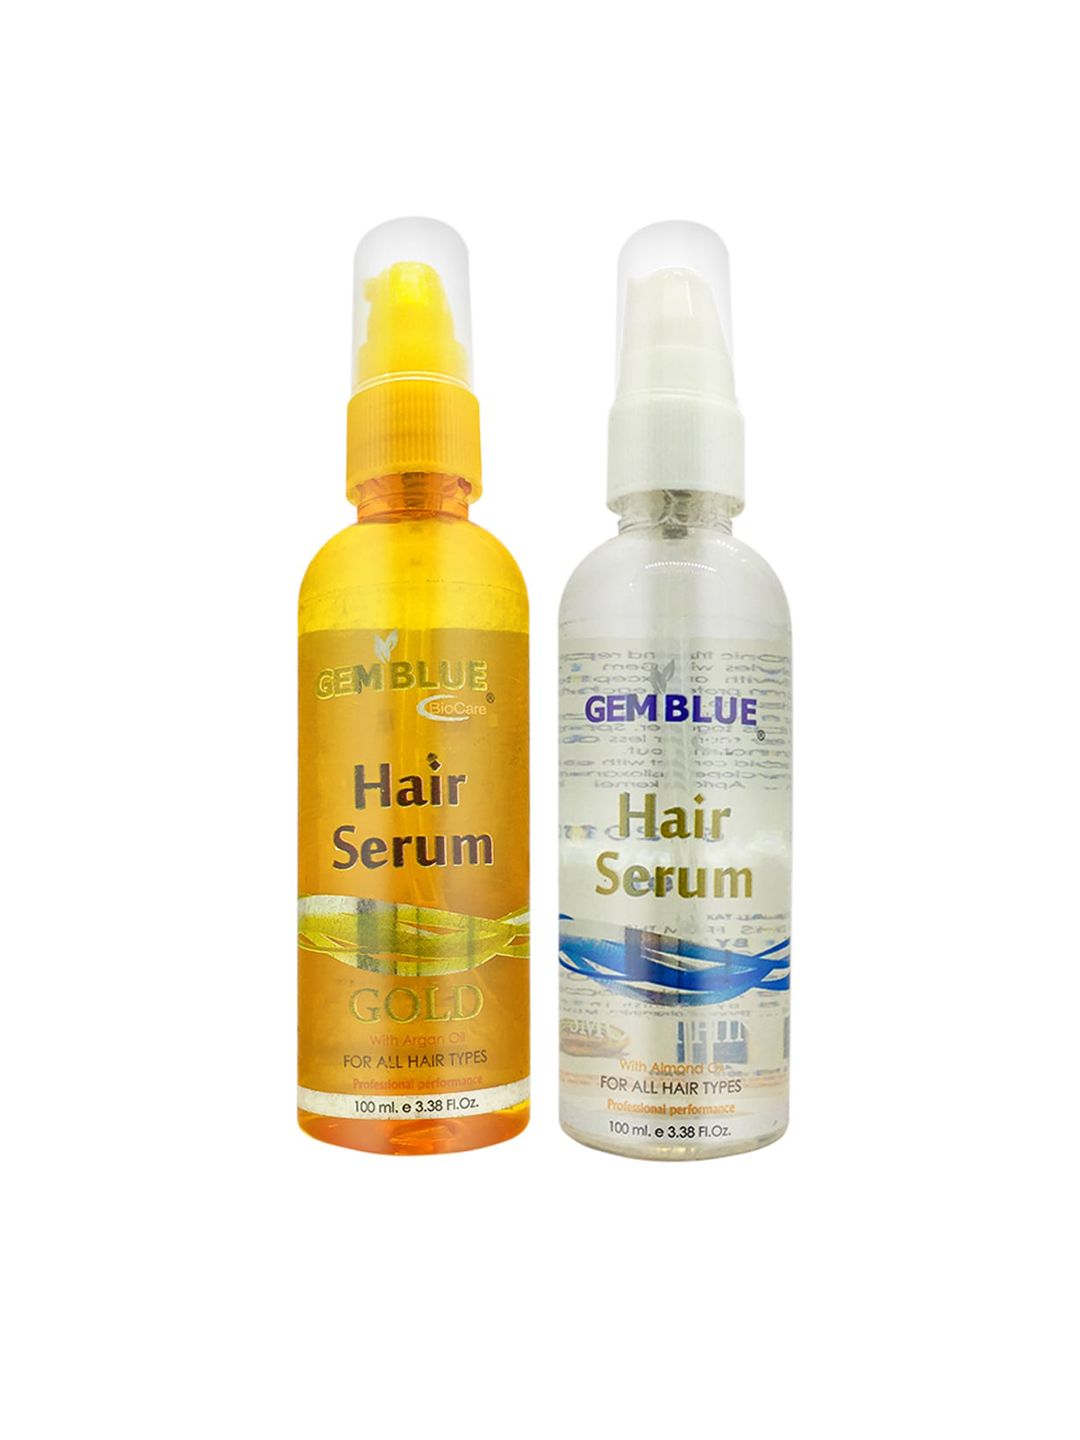 GEMBLUE BioCare Unisex Combo of 2 Silver & Gold Almond Hair Serum 200ml Price in India